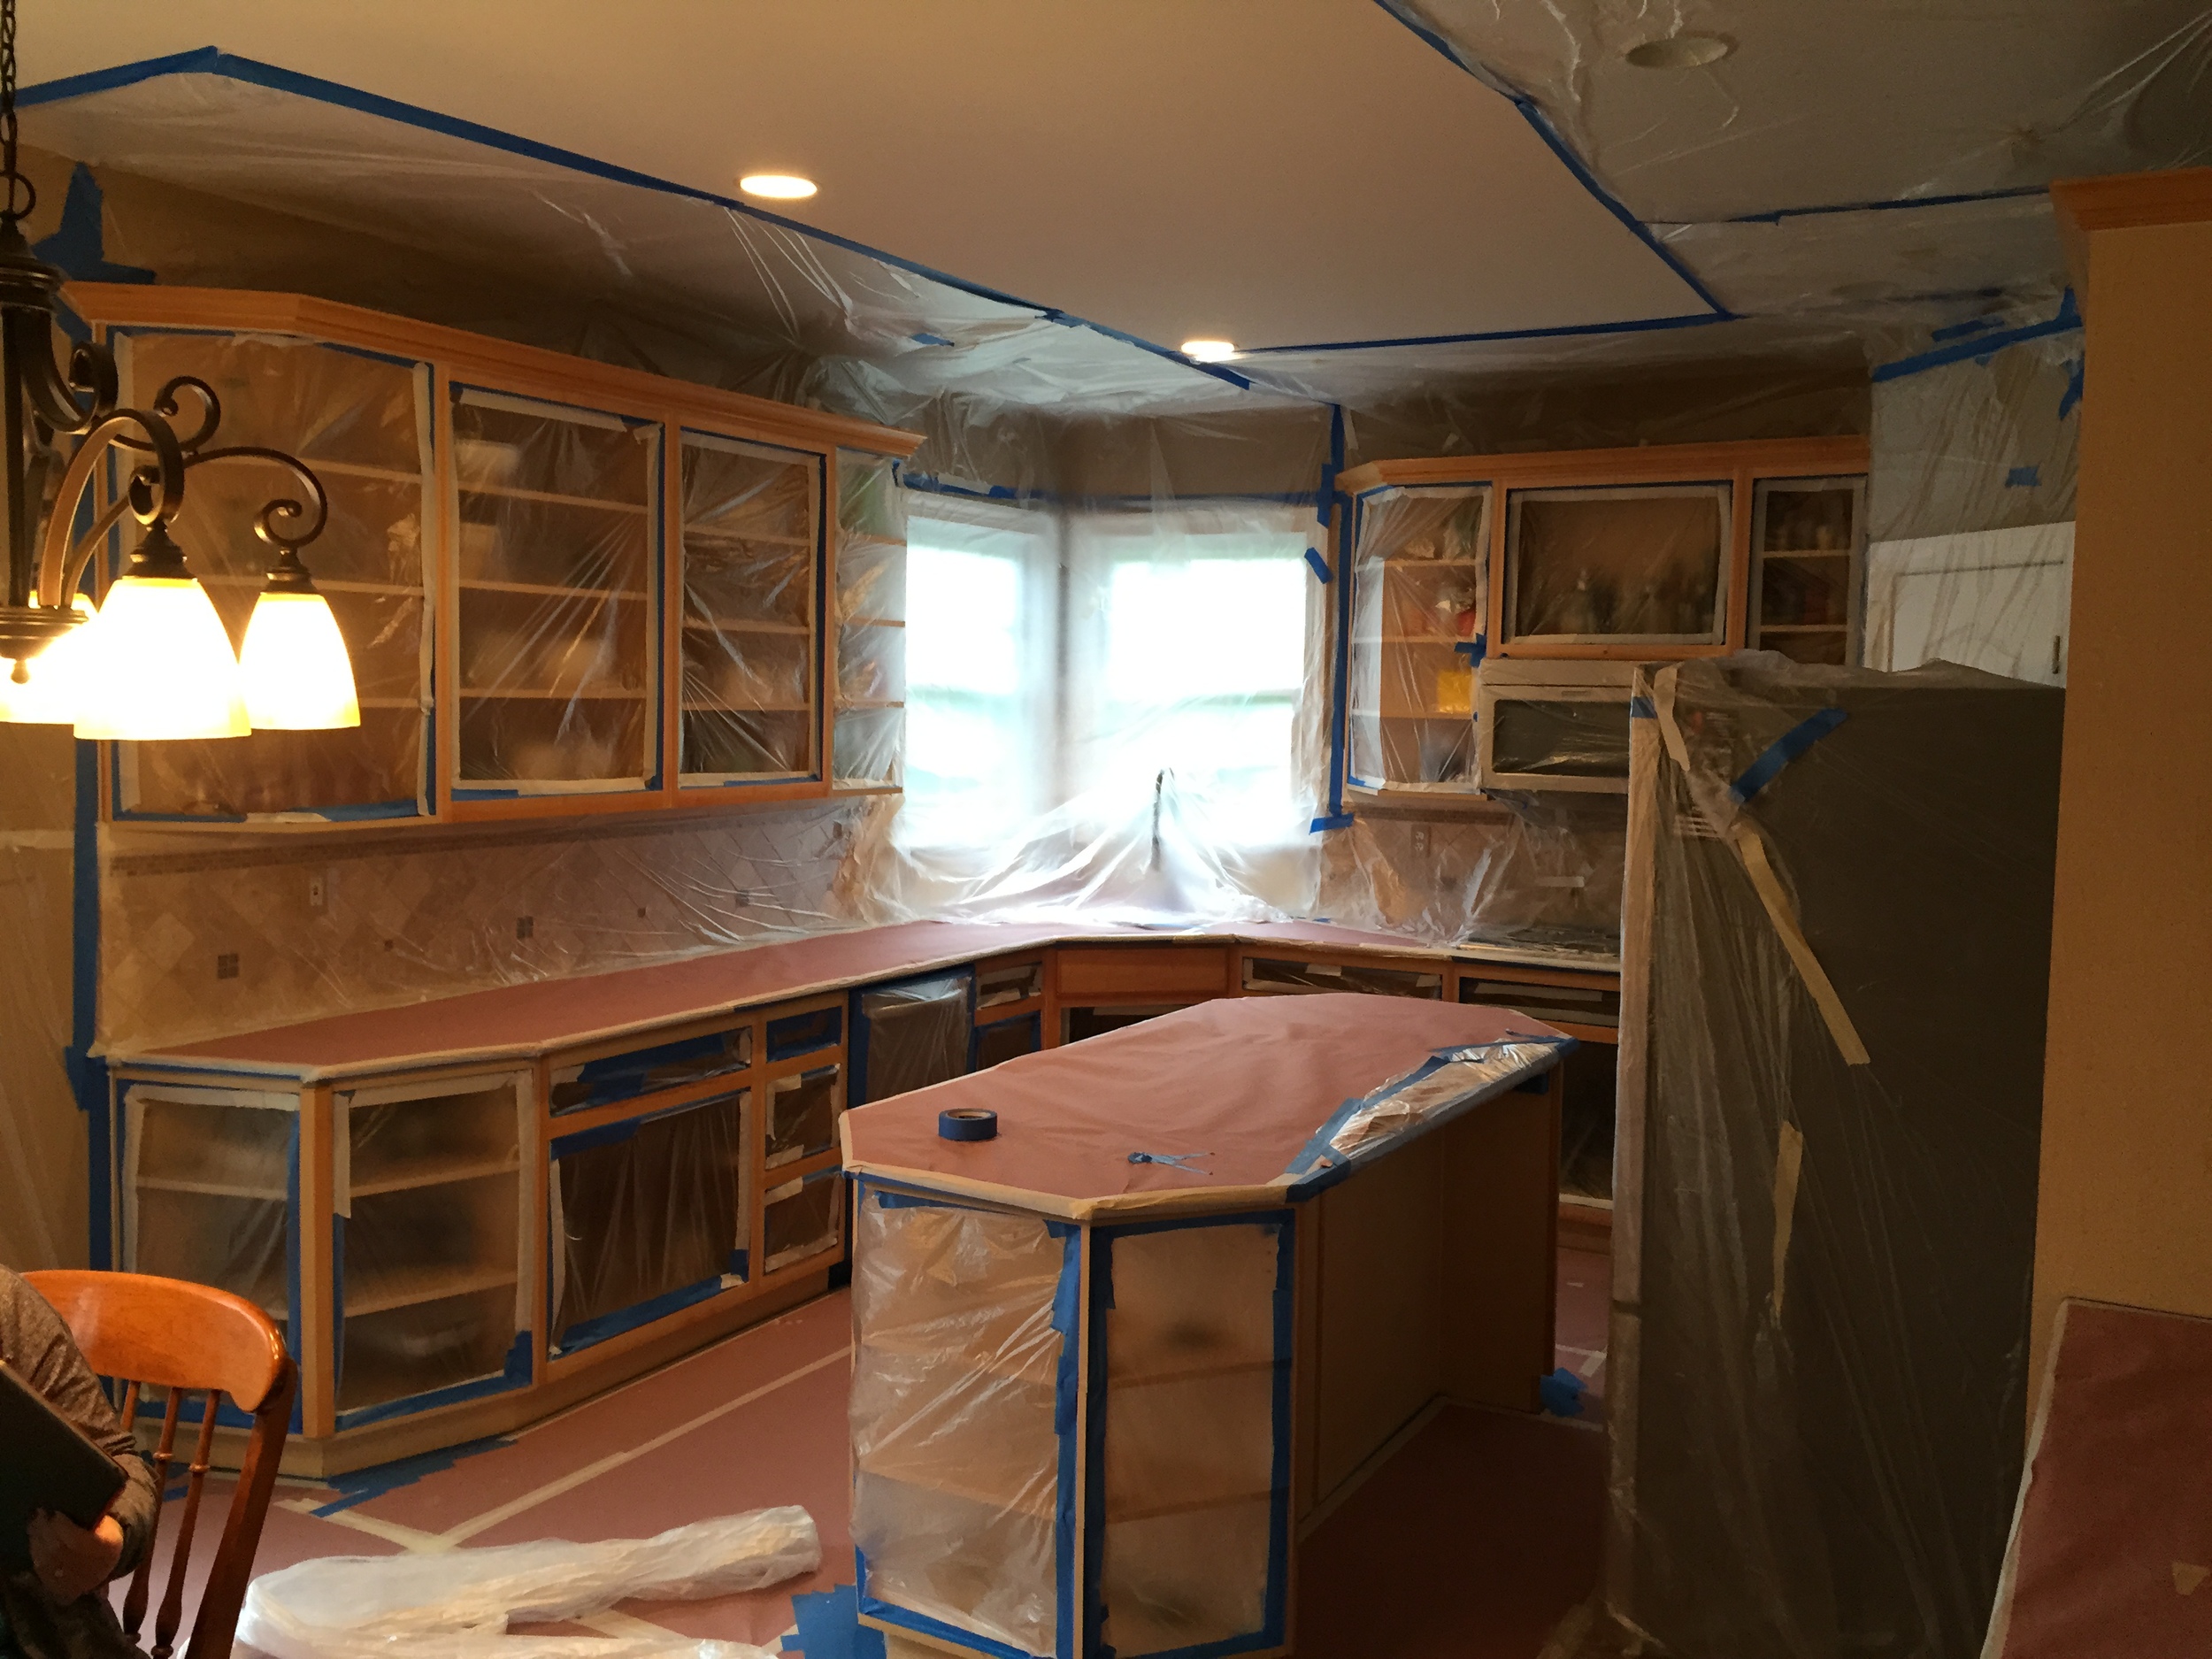 Kitchen Cabinet Painting in Downingtown, PA